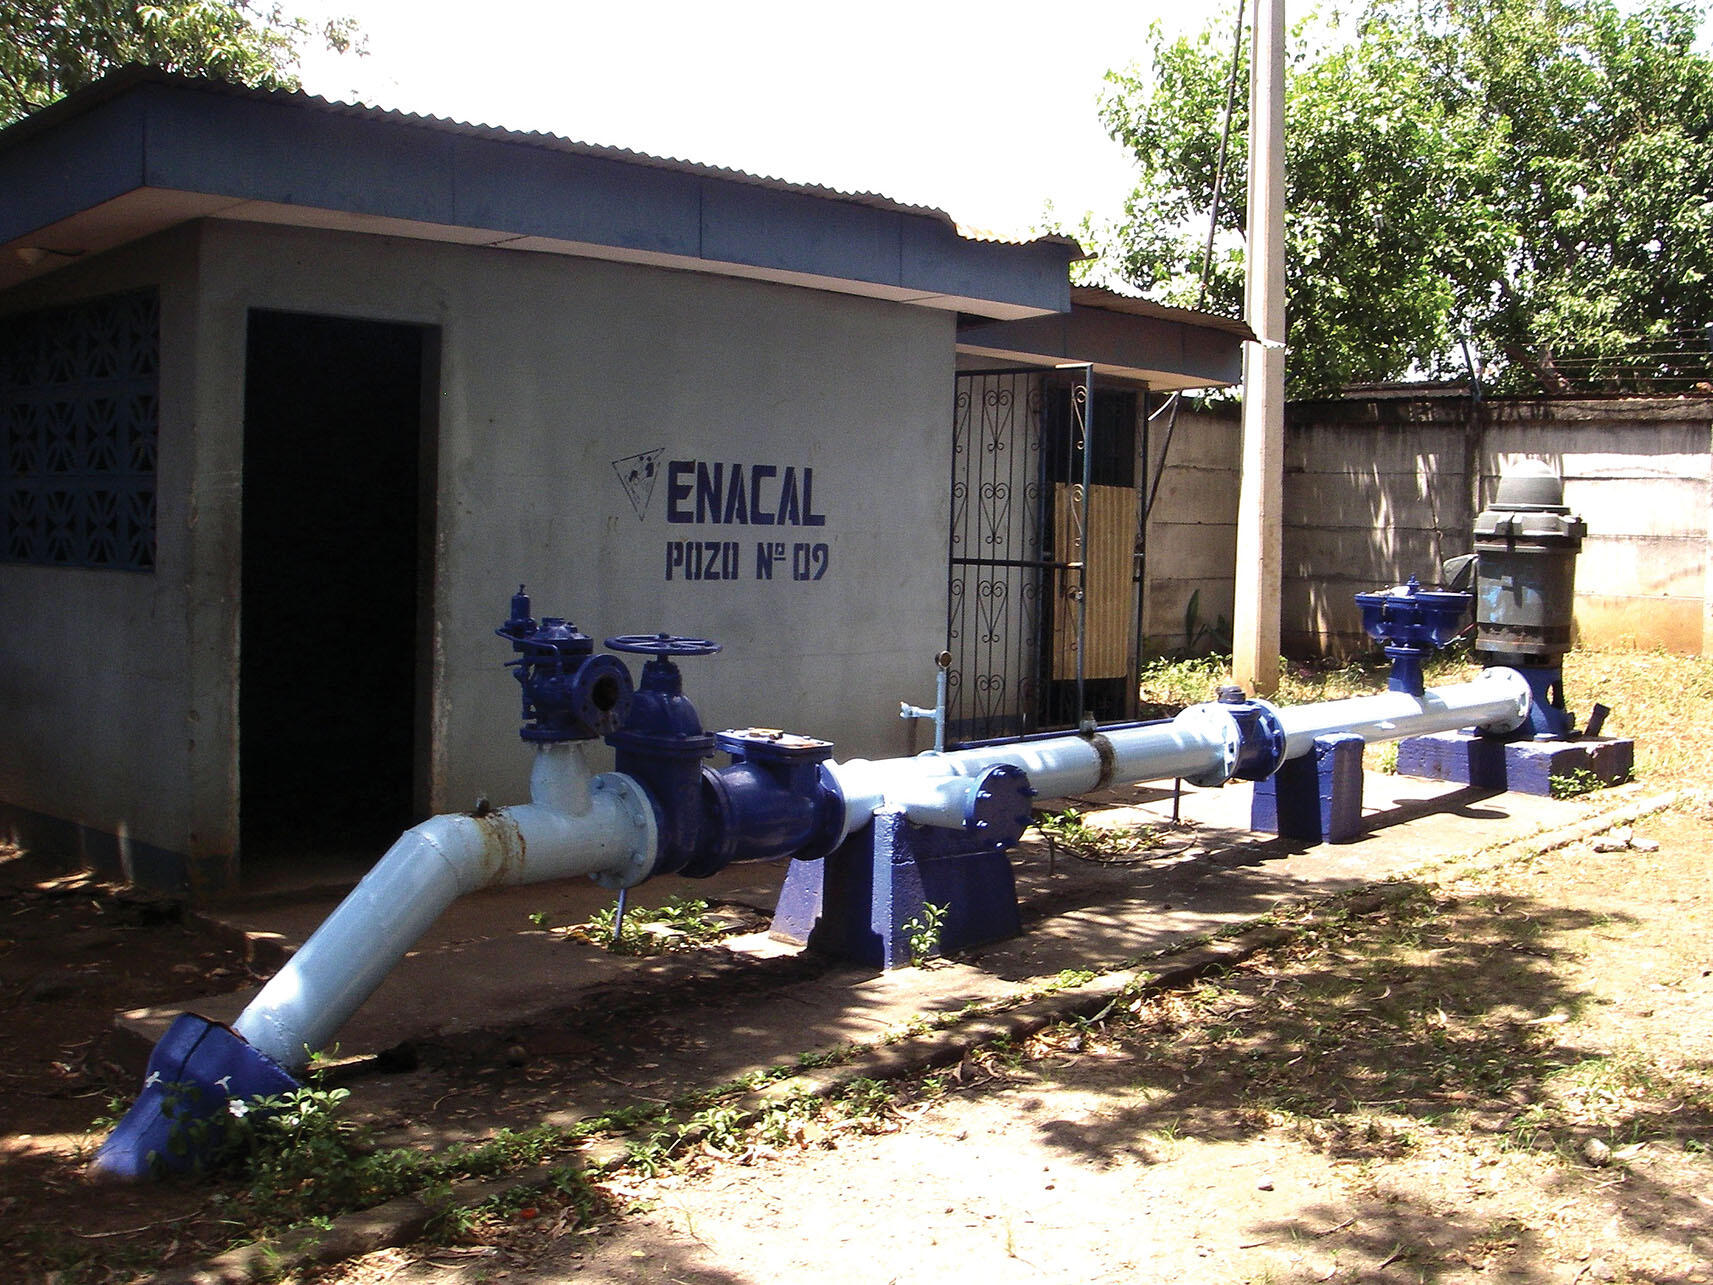 A pumping station In Managua, where power outages and surges often cause utility water wells to shut down temporarily. (Photo by John Erickson.)